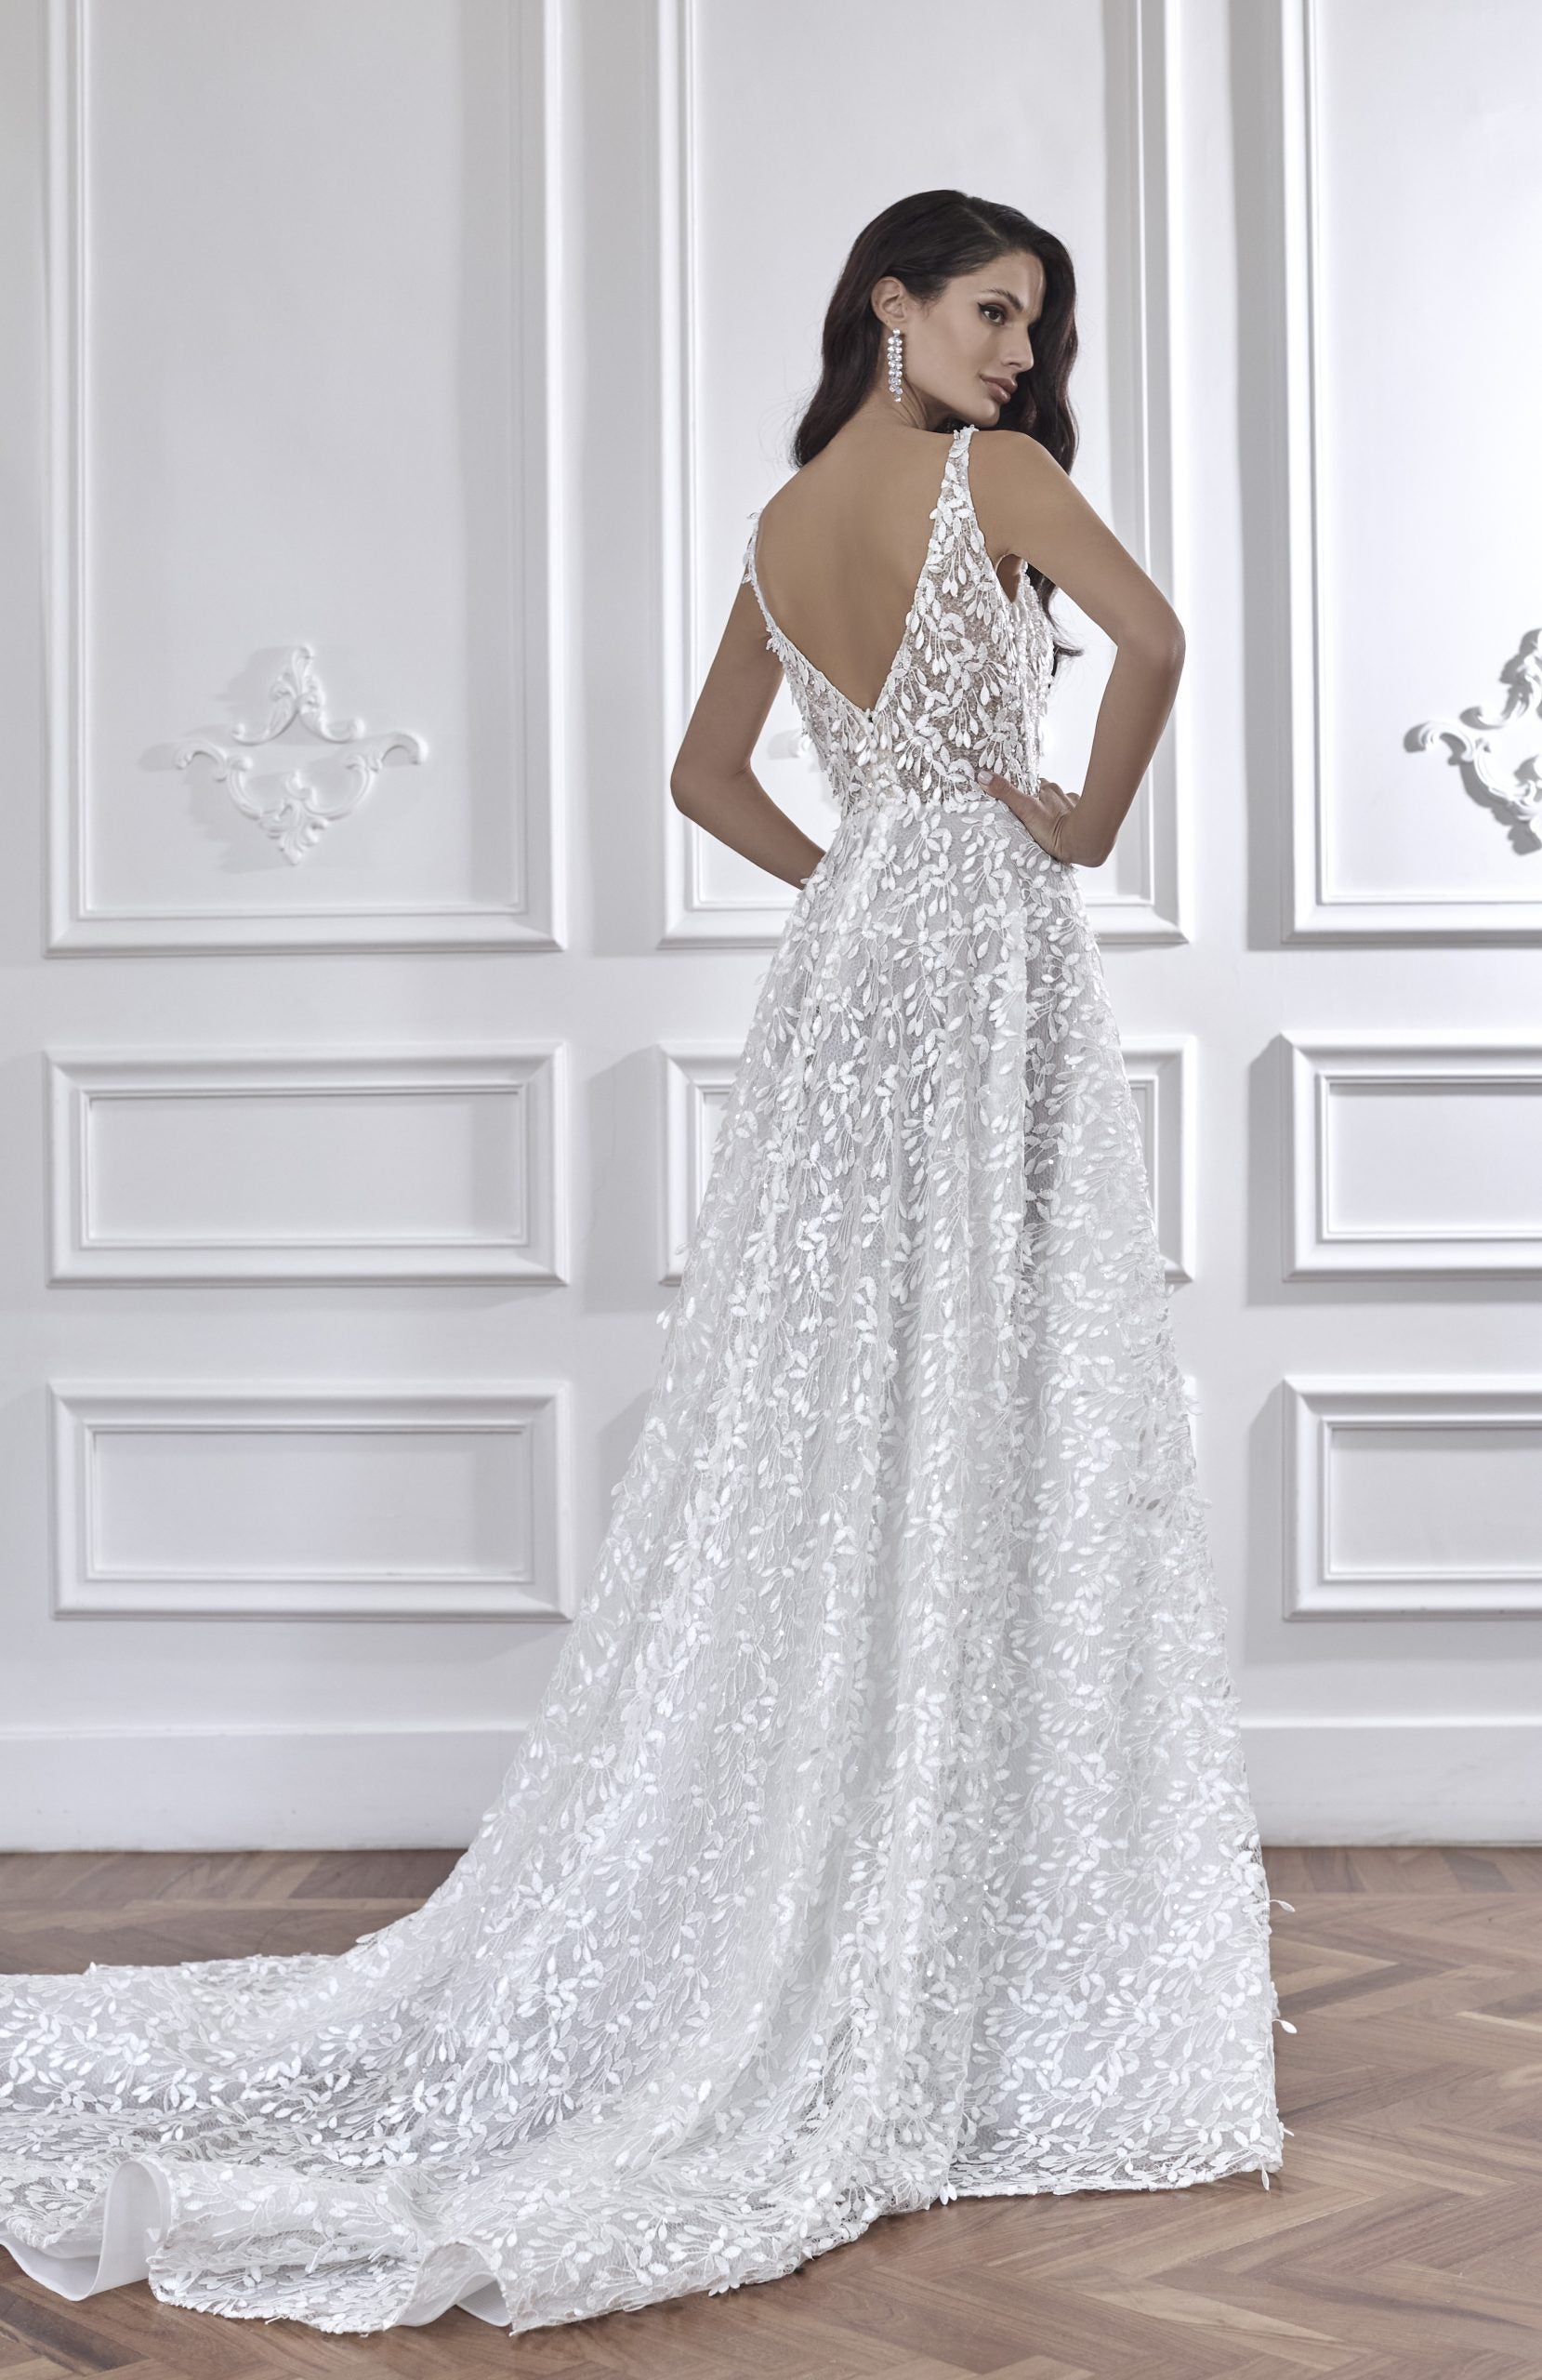 Sleeveless A-line Wedding Dress With Open Back by Maison Signore - Image 2